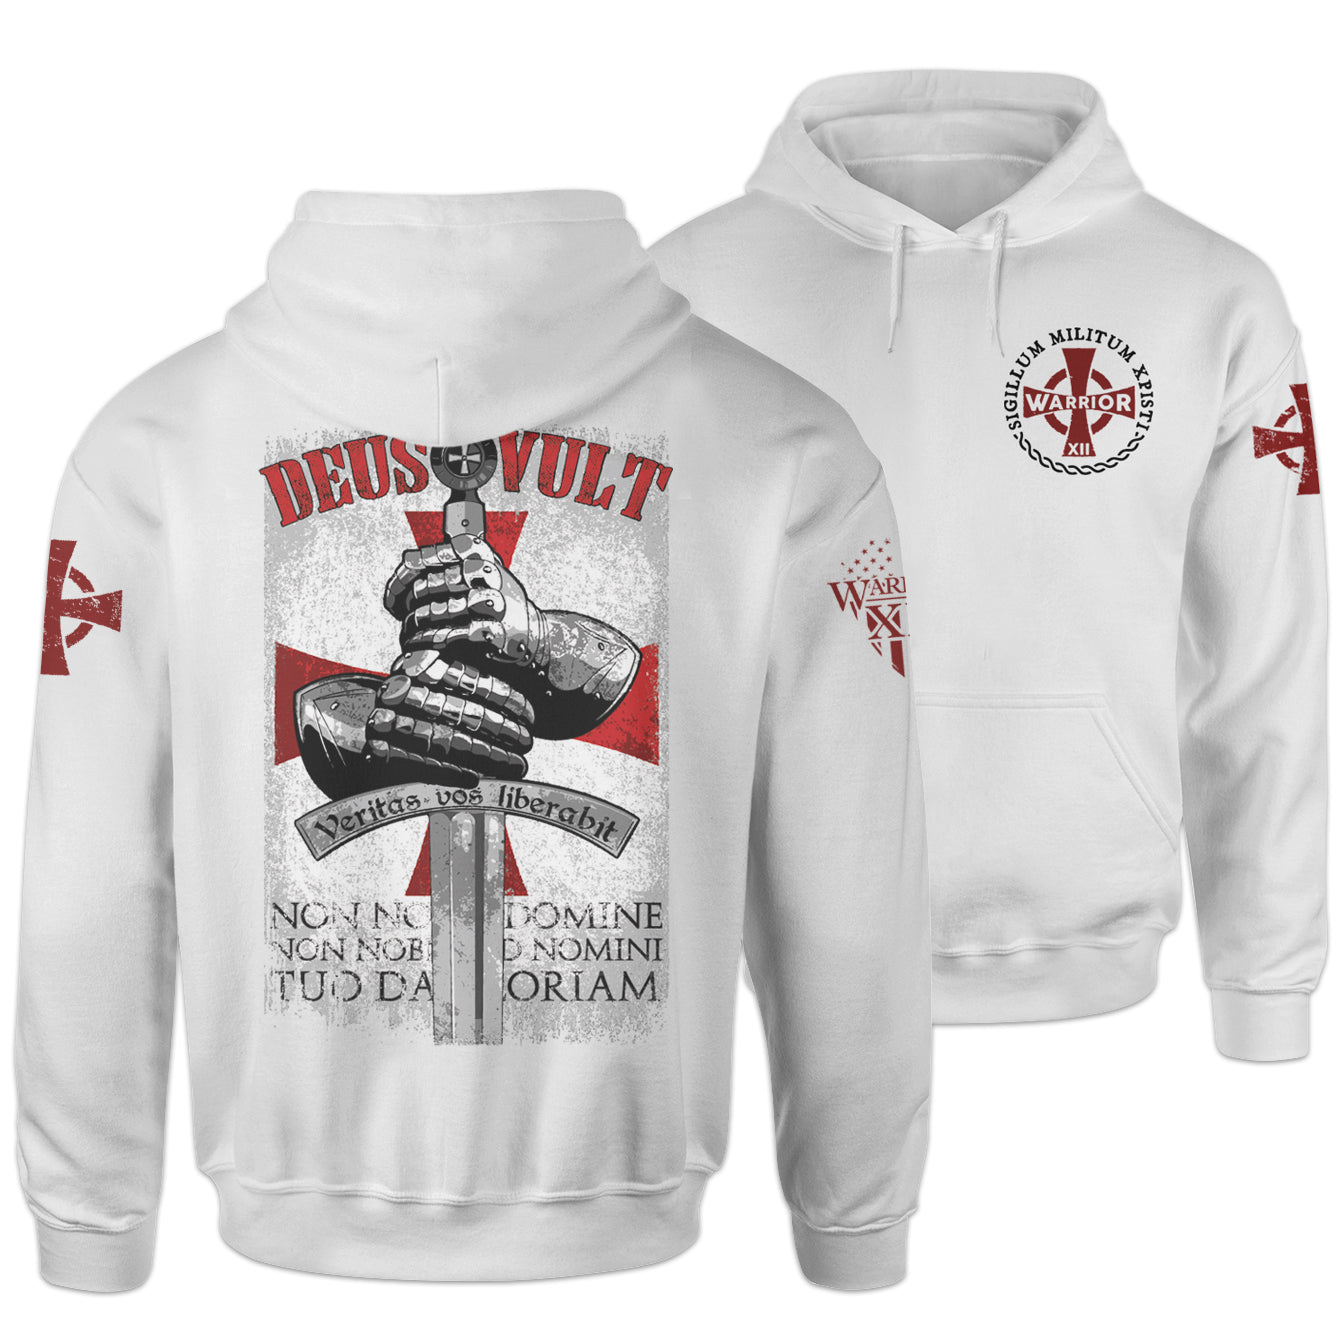 Front and back white hoodie with a design that is an iconic representation of the crusaders that invokes the spirit of the warriors of Christ. The design of the hands around the sword is printed on the back.